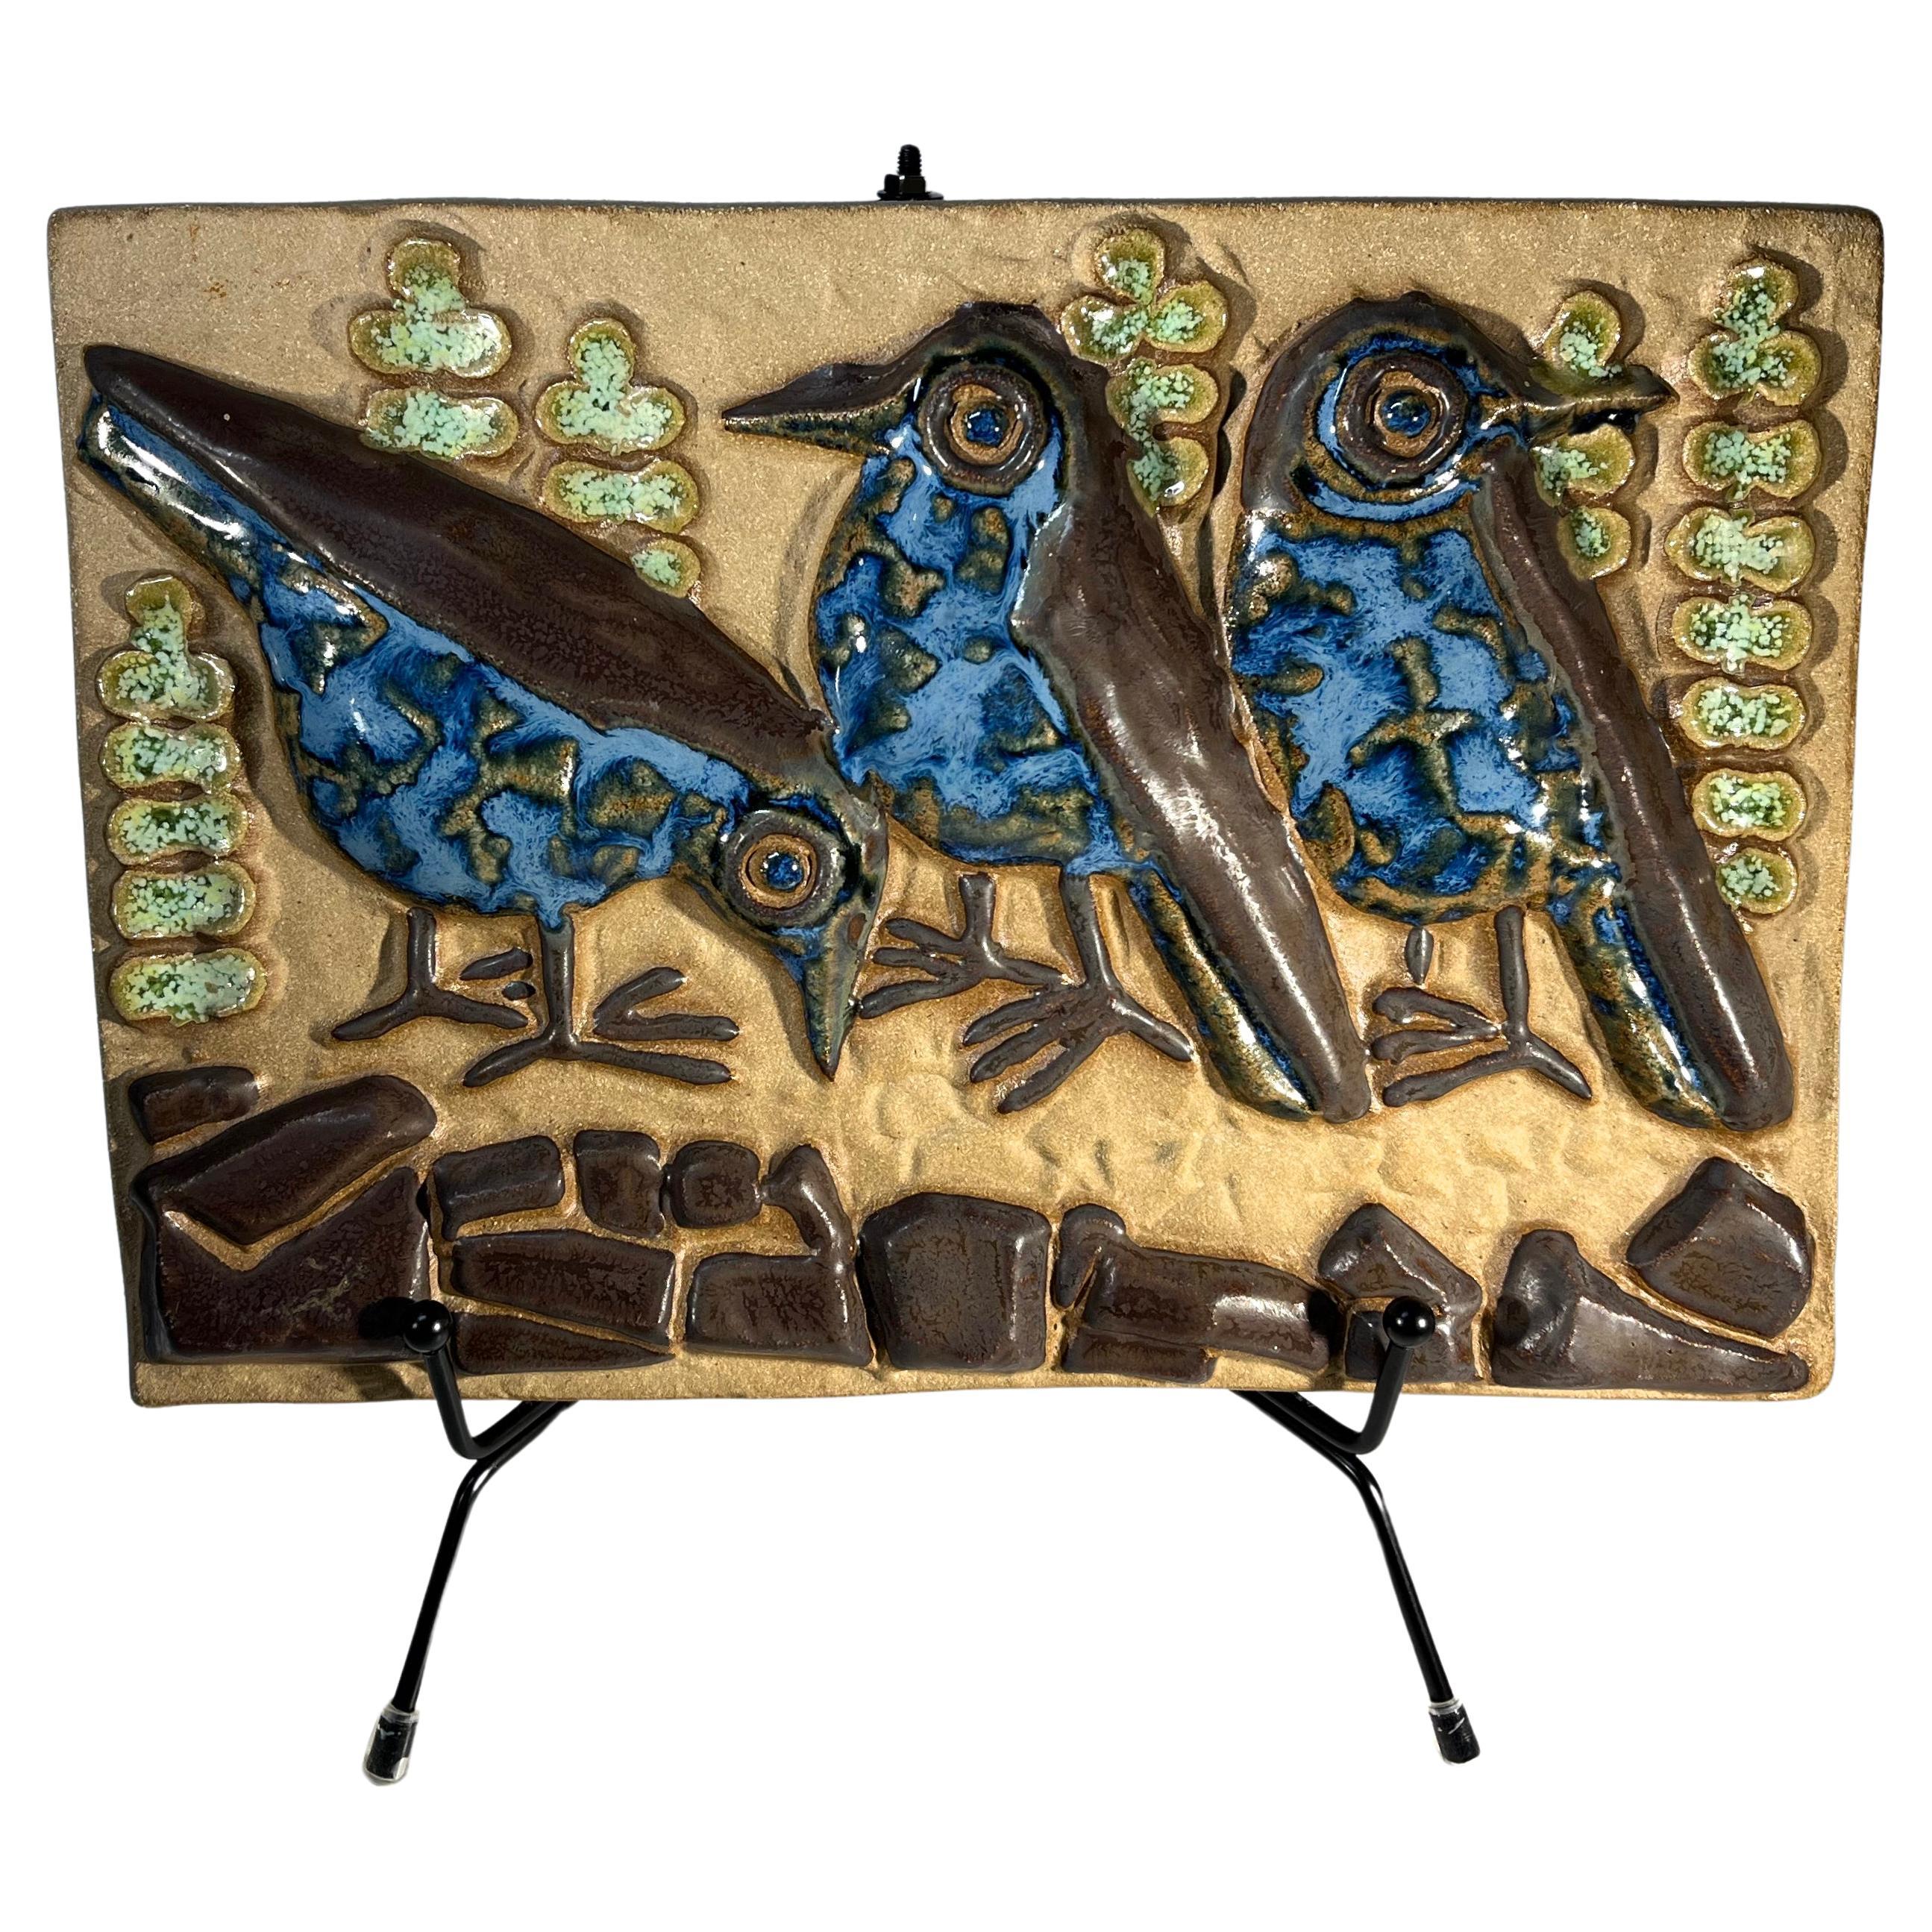 Bluebirds Trio By Marianne Starck For Michael Andersen. Danish Wall Plaque For Sale